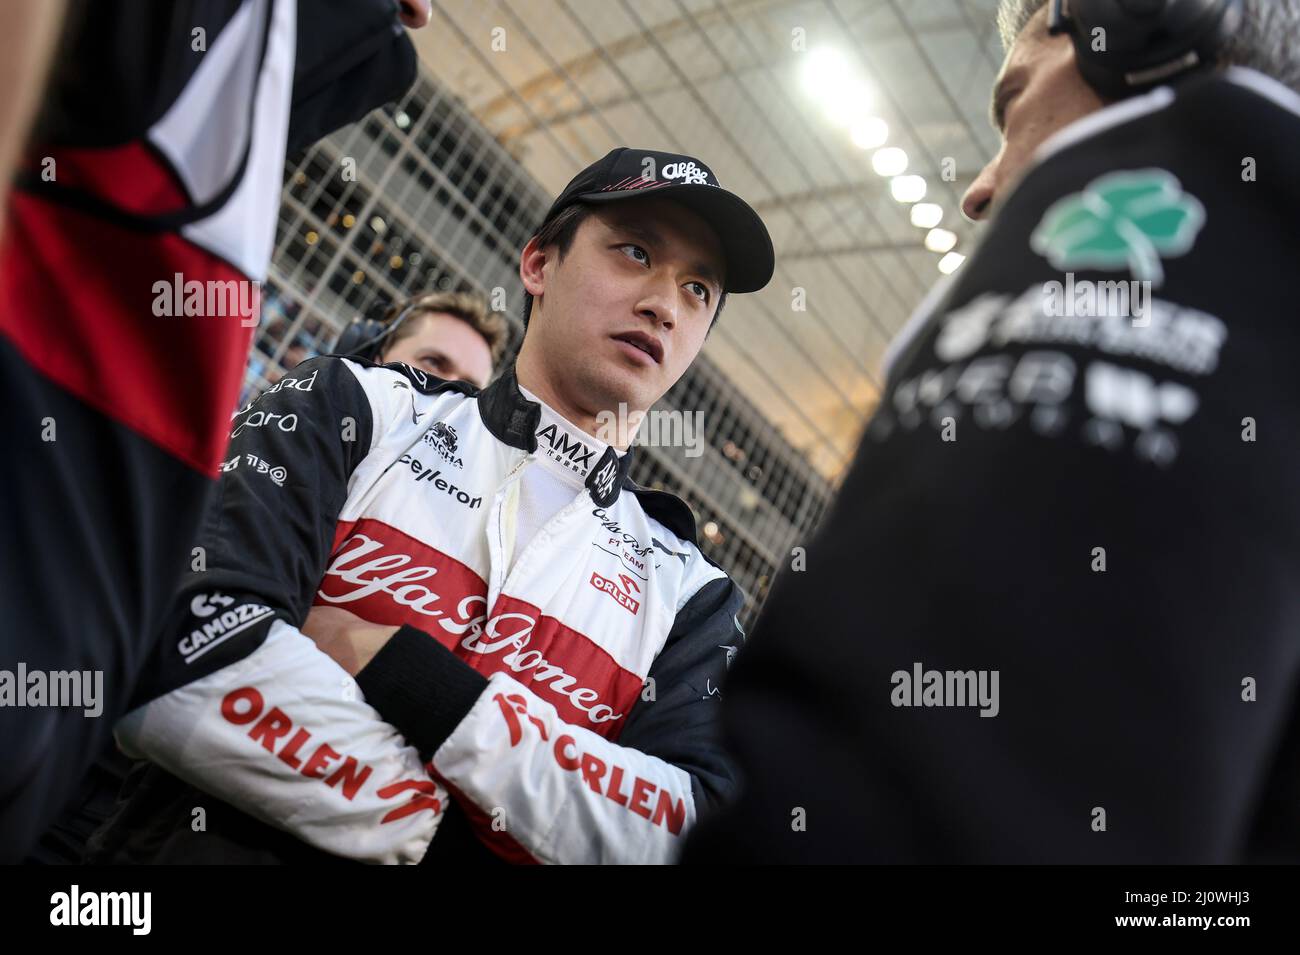 (220321) -- SAKHIR, March 21, 2022 (Xinhua) -- Alfa Romeo's Chinese driver Zhou Guanyu (C) chats with his team during the Bahrain Formula One Grand Prix at the Bahrain International Circuit in the city of Sakhir on March 20, 2022. (DPPI/Handout via Xinhua) Stock Photo